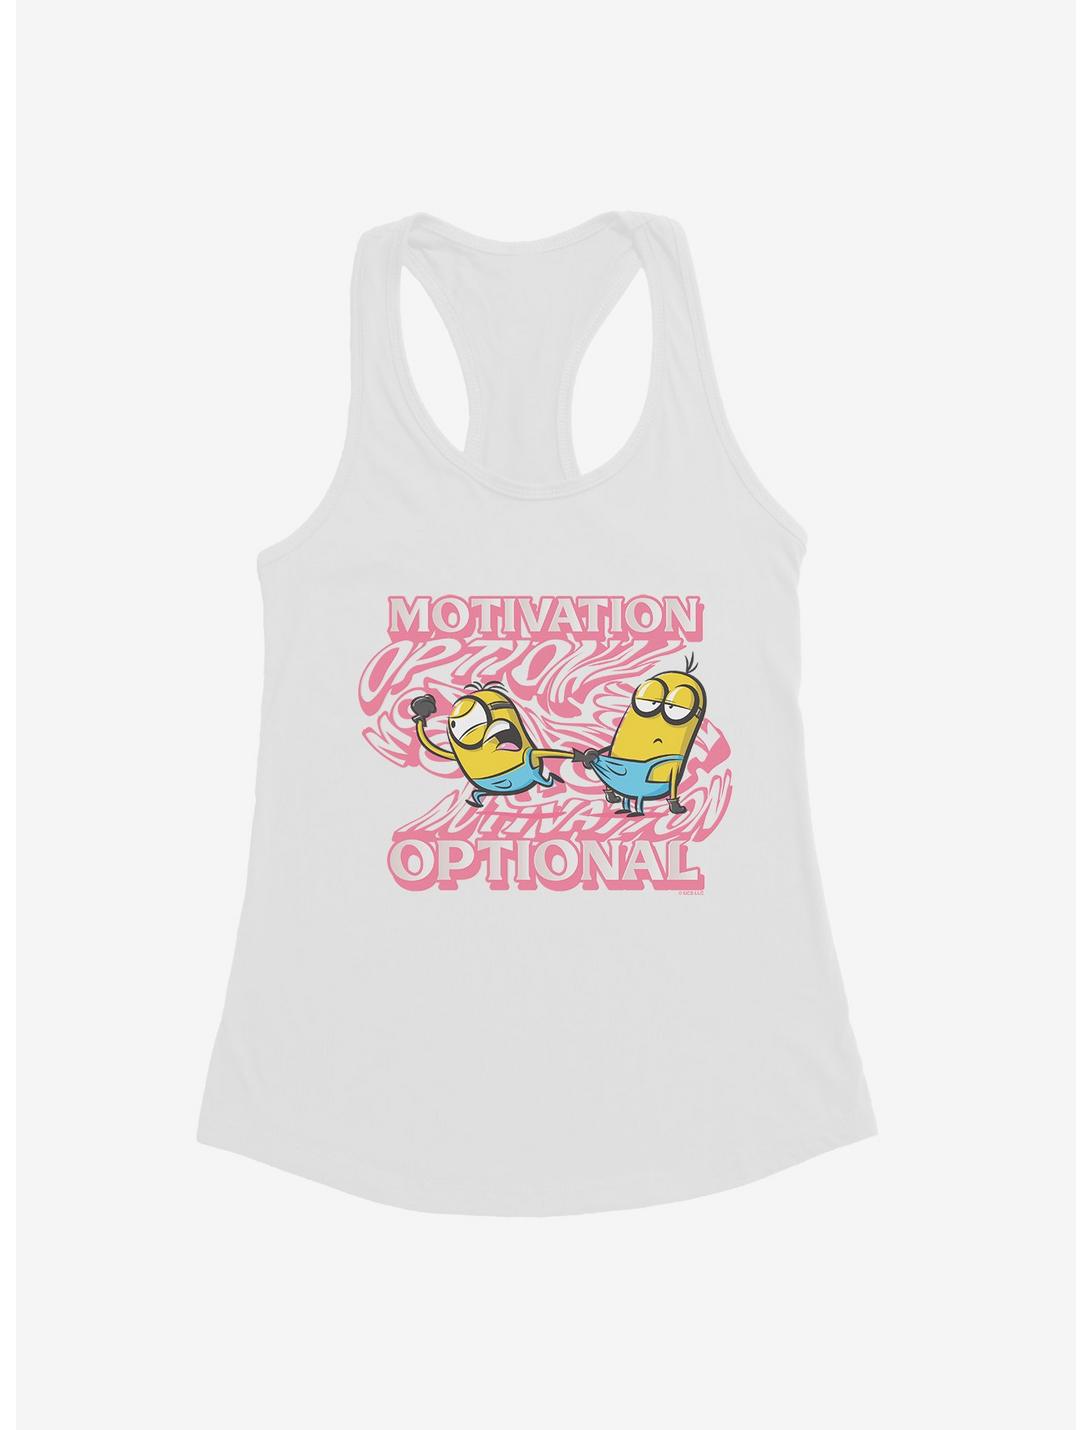 Minions Groovy Motivation Optional Womens Tank Top, WHITE, hi-res